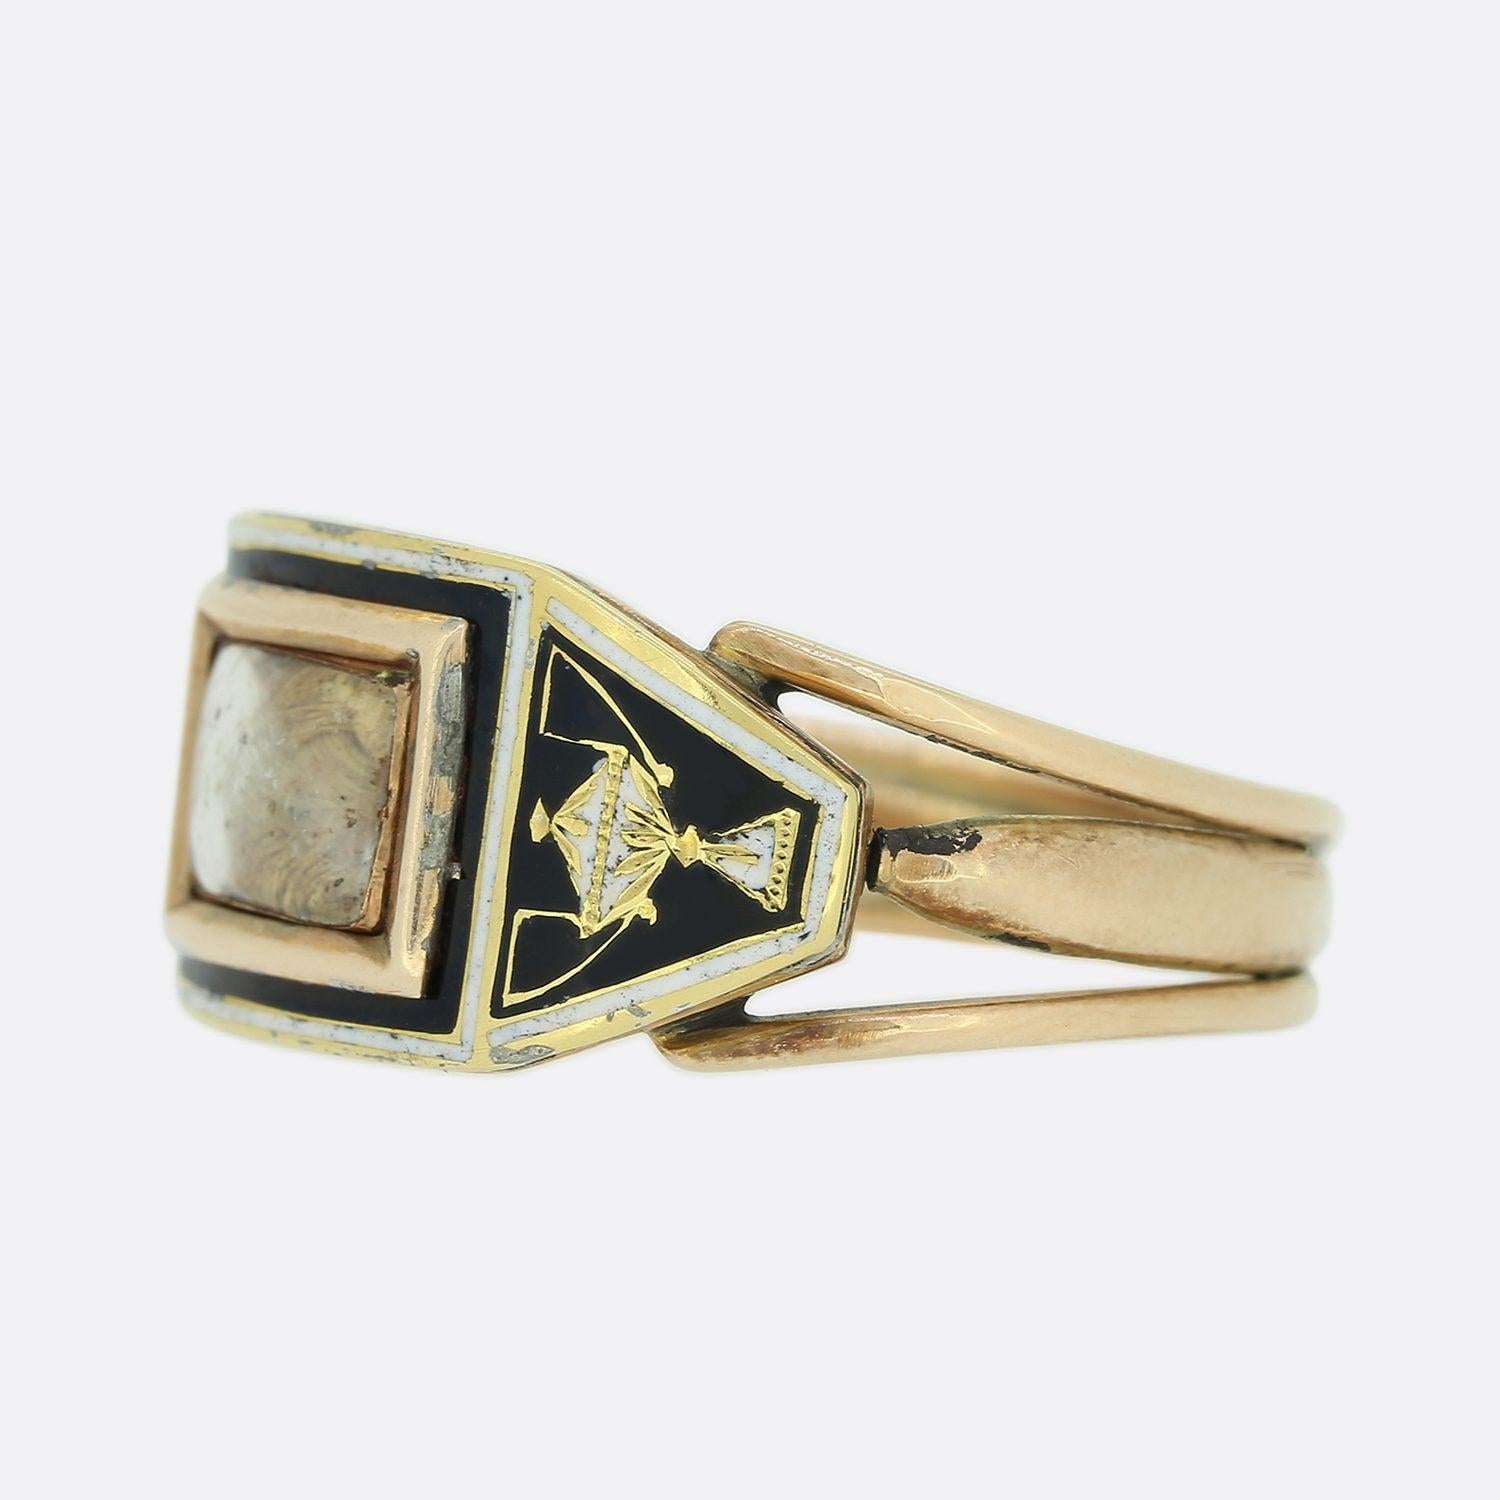 This is a wonderful 15ct yellow gold mourning ring from the Victorian era. The ring has been set with a central rectangular window that features a small locket of hair with a border of black and white enamel. Both the face of the ring and the